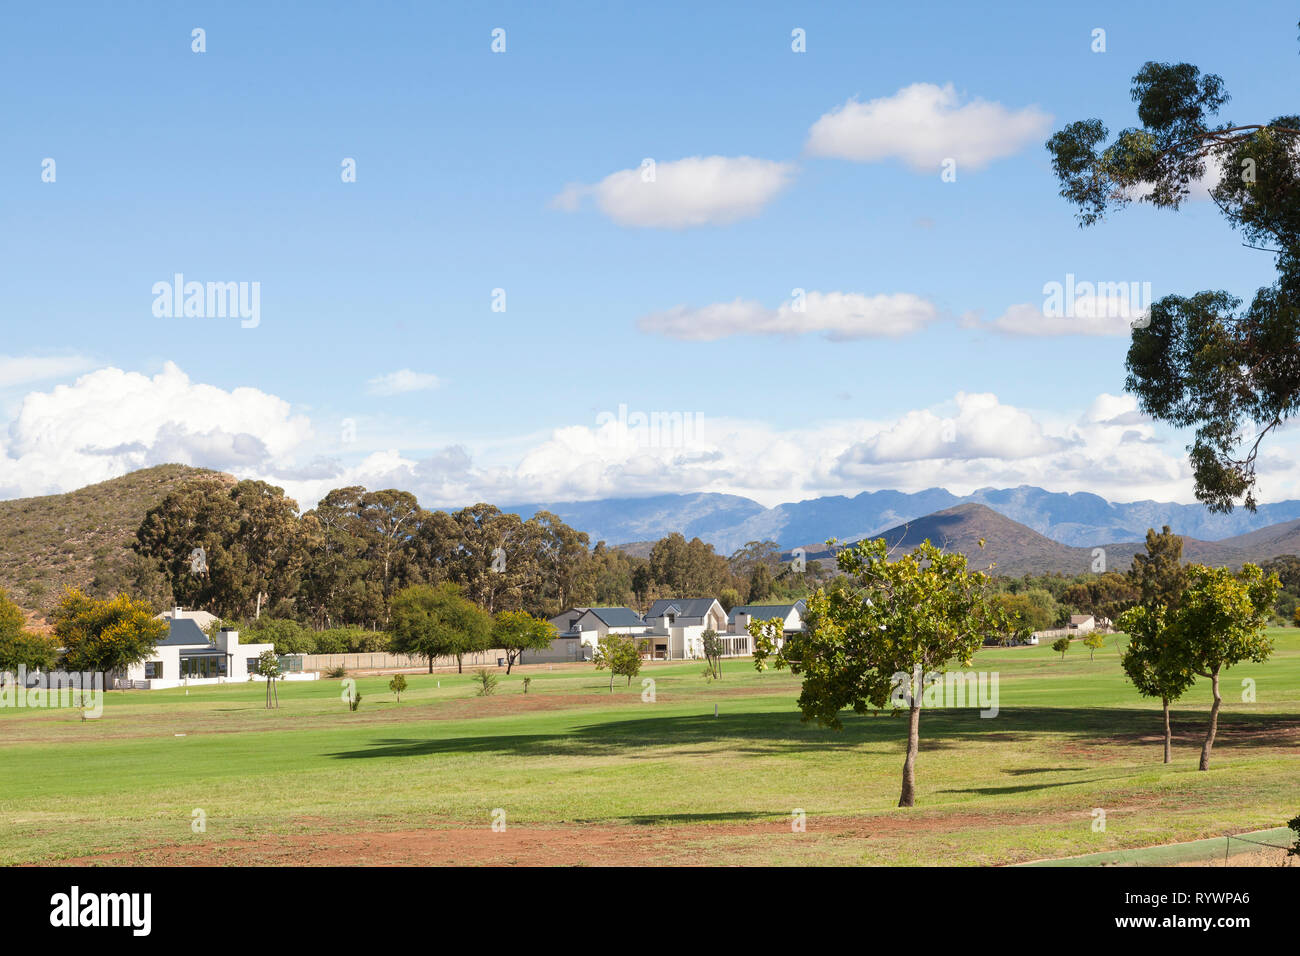 Scenic landscape view of the greens and fairways of the Robertson Golf Course,  Silwerstrand Golf Estate, Breede River Valley, Western Cape, South Afr Stock Photo